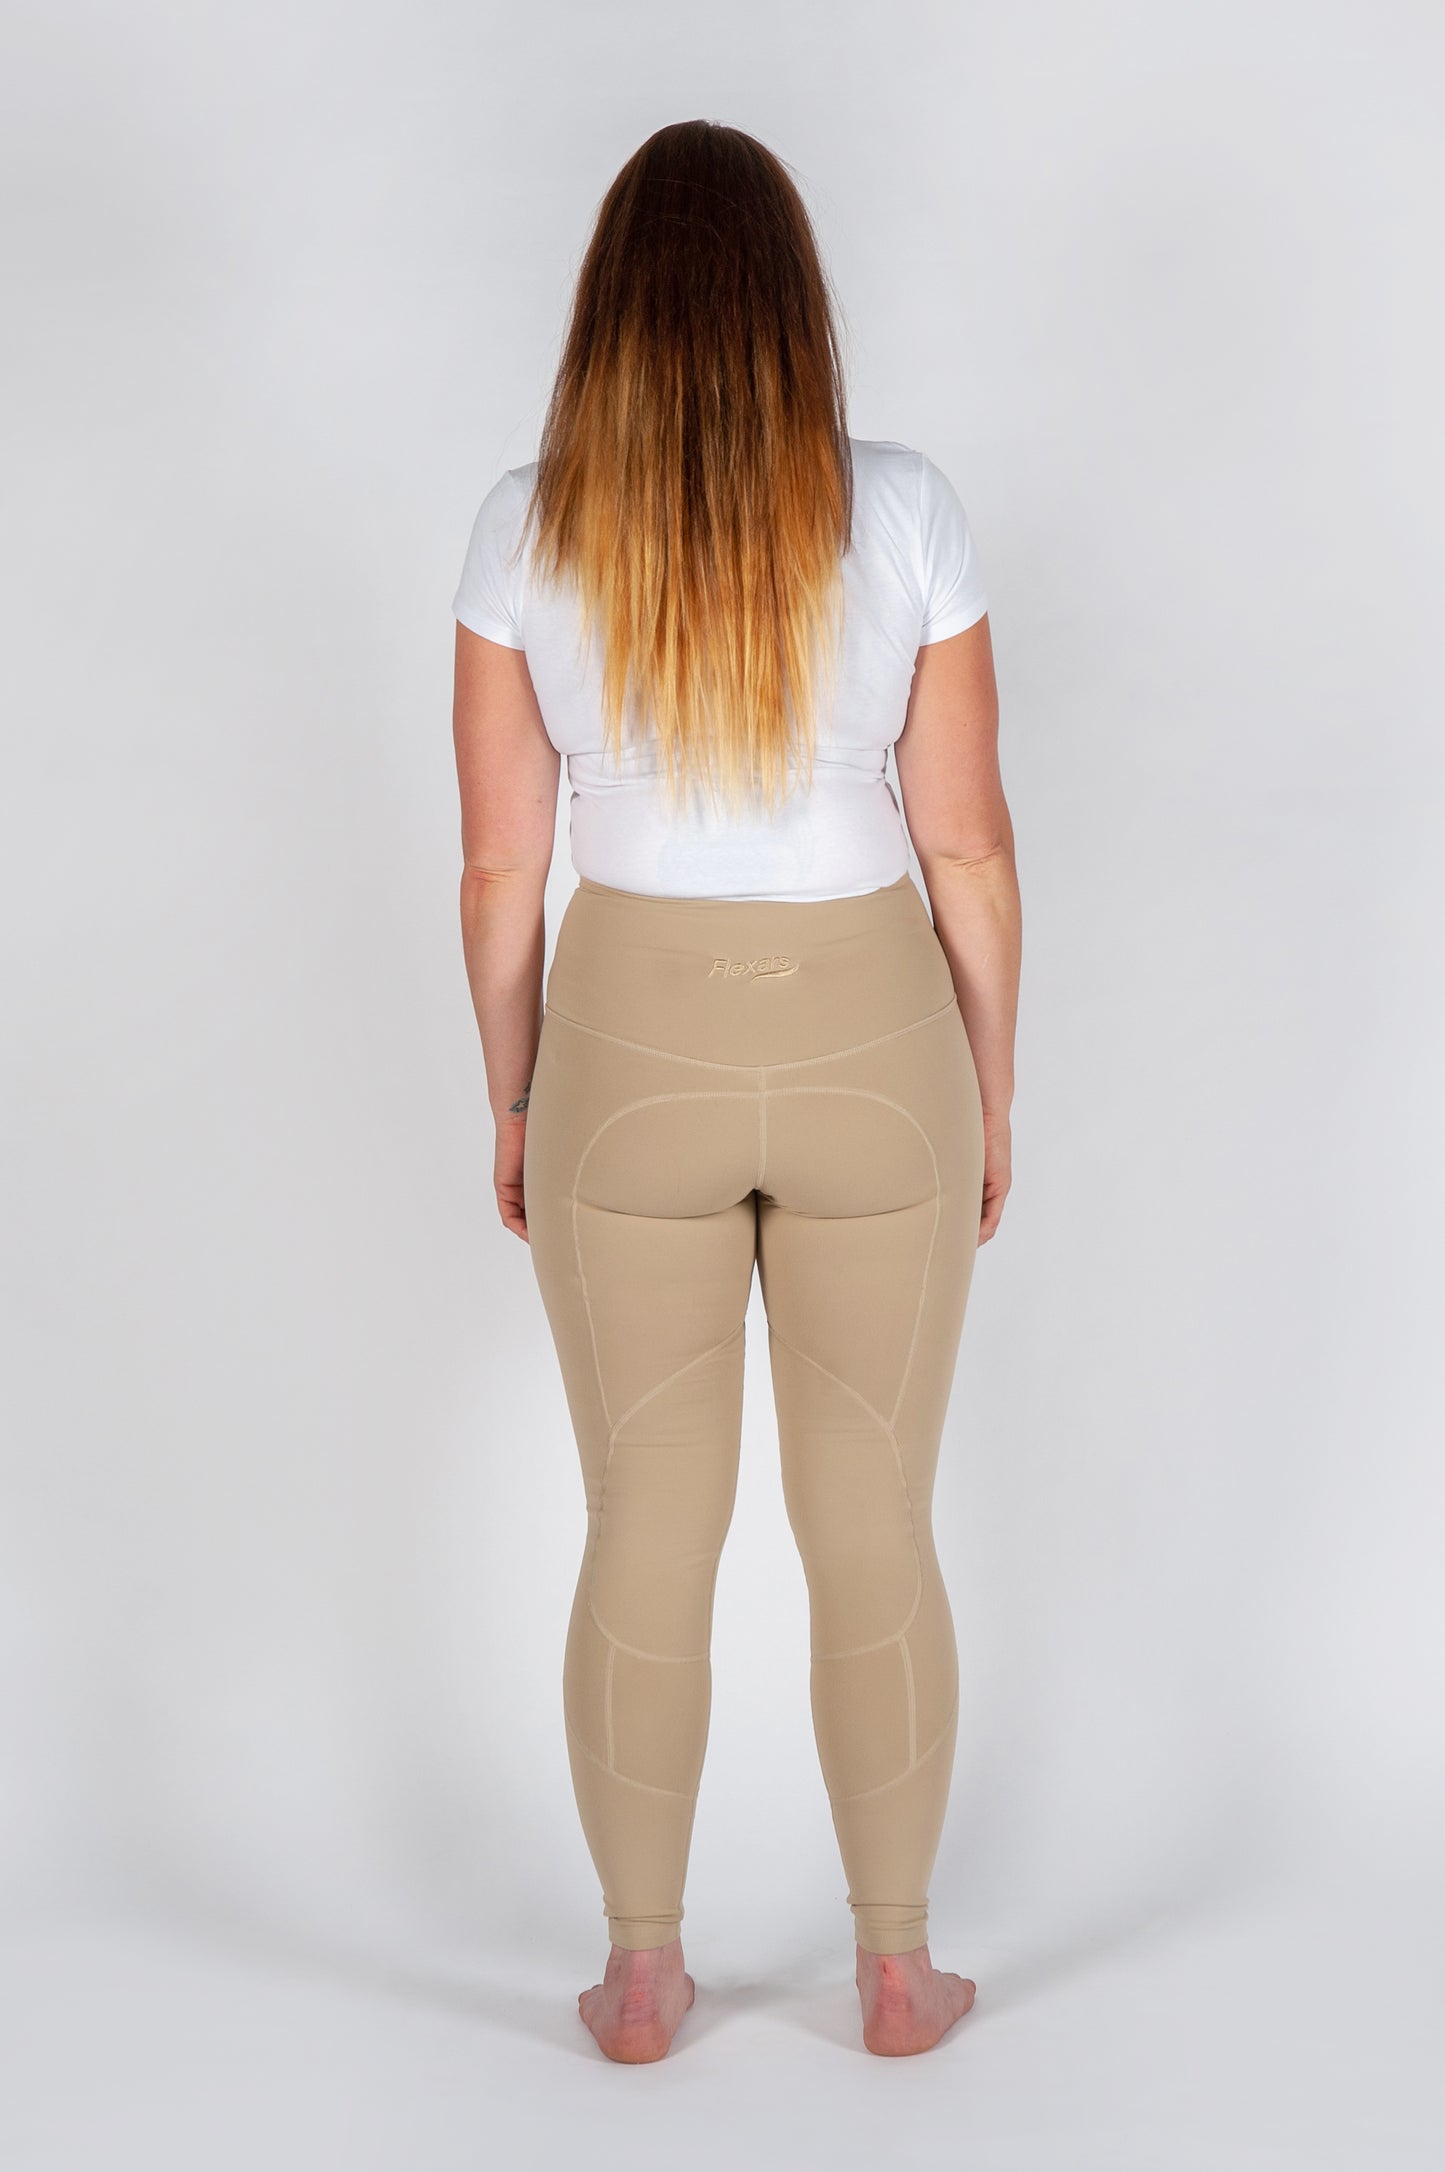 Competition riding leggings in beige